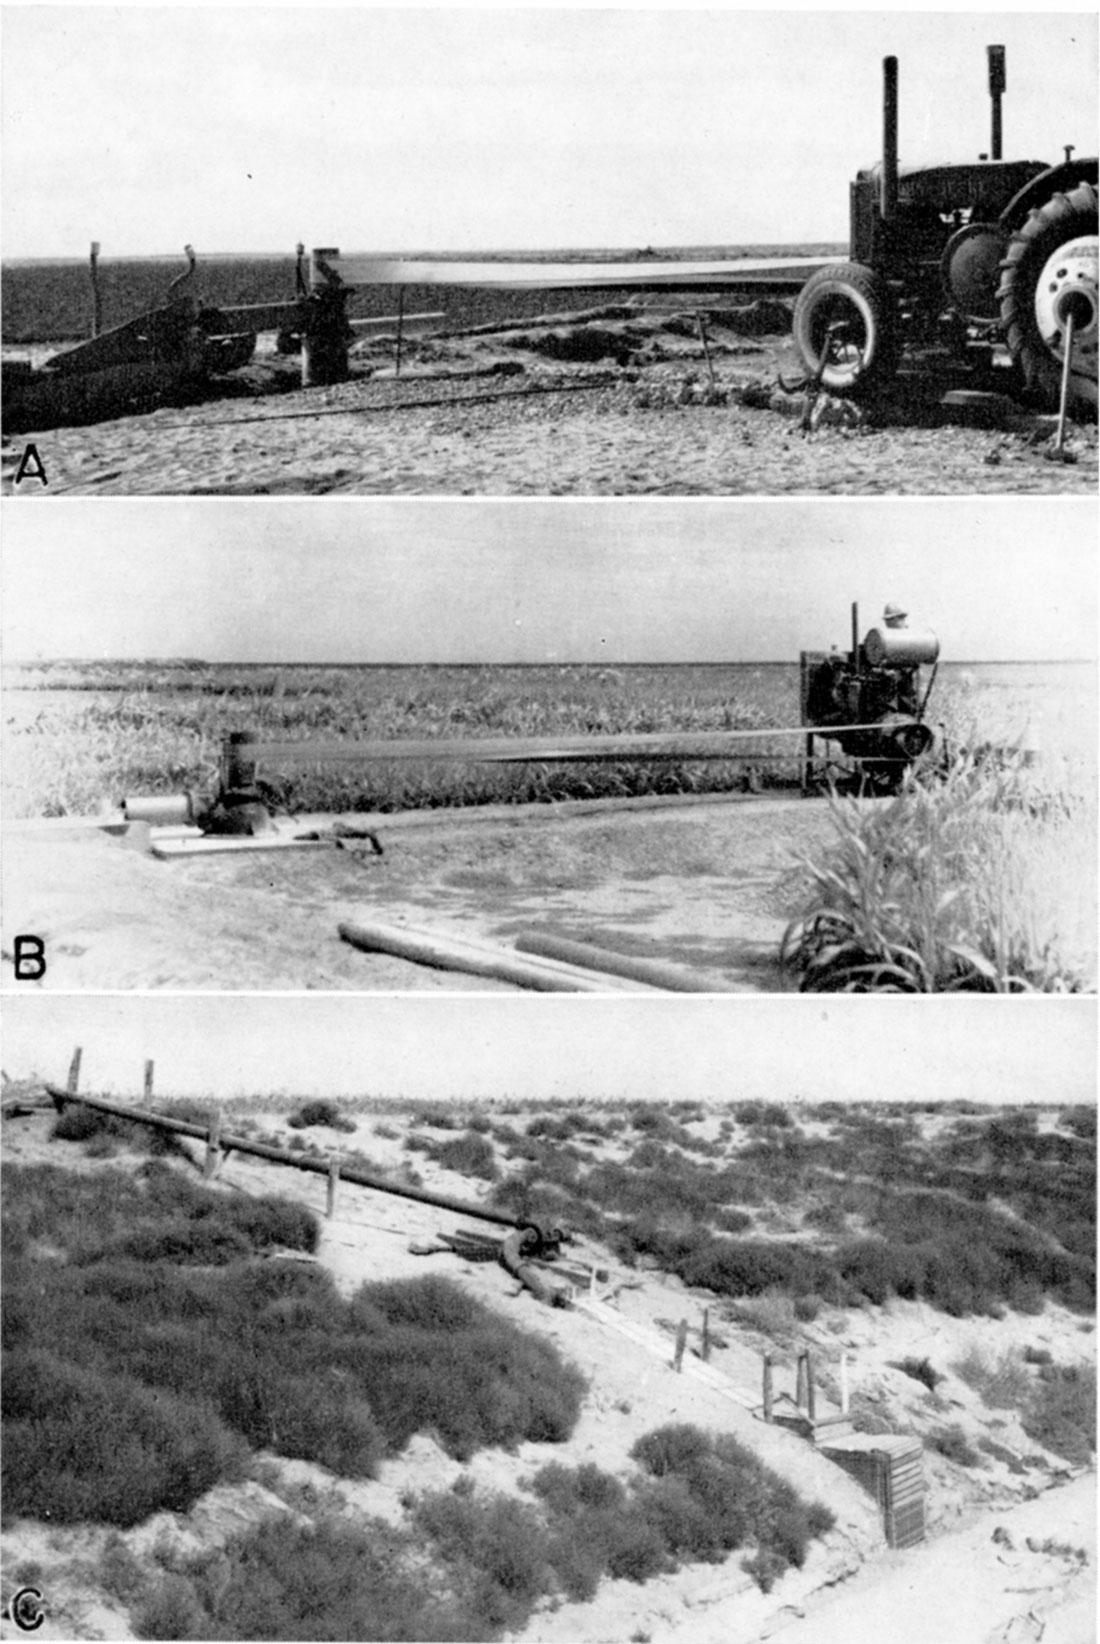 Three black and white photos; top is irrigation well (19) owned by Clarence Winger; middle is irrigation well (6) owned by M. P. Molz; bottom is surface-water pumping plant owned by Fred Collingwood.